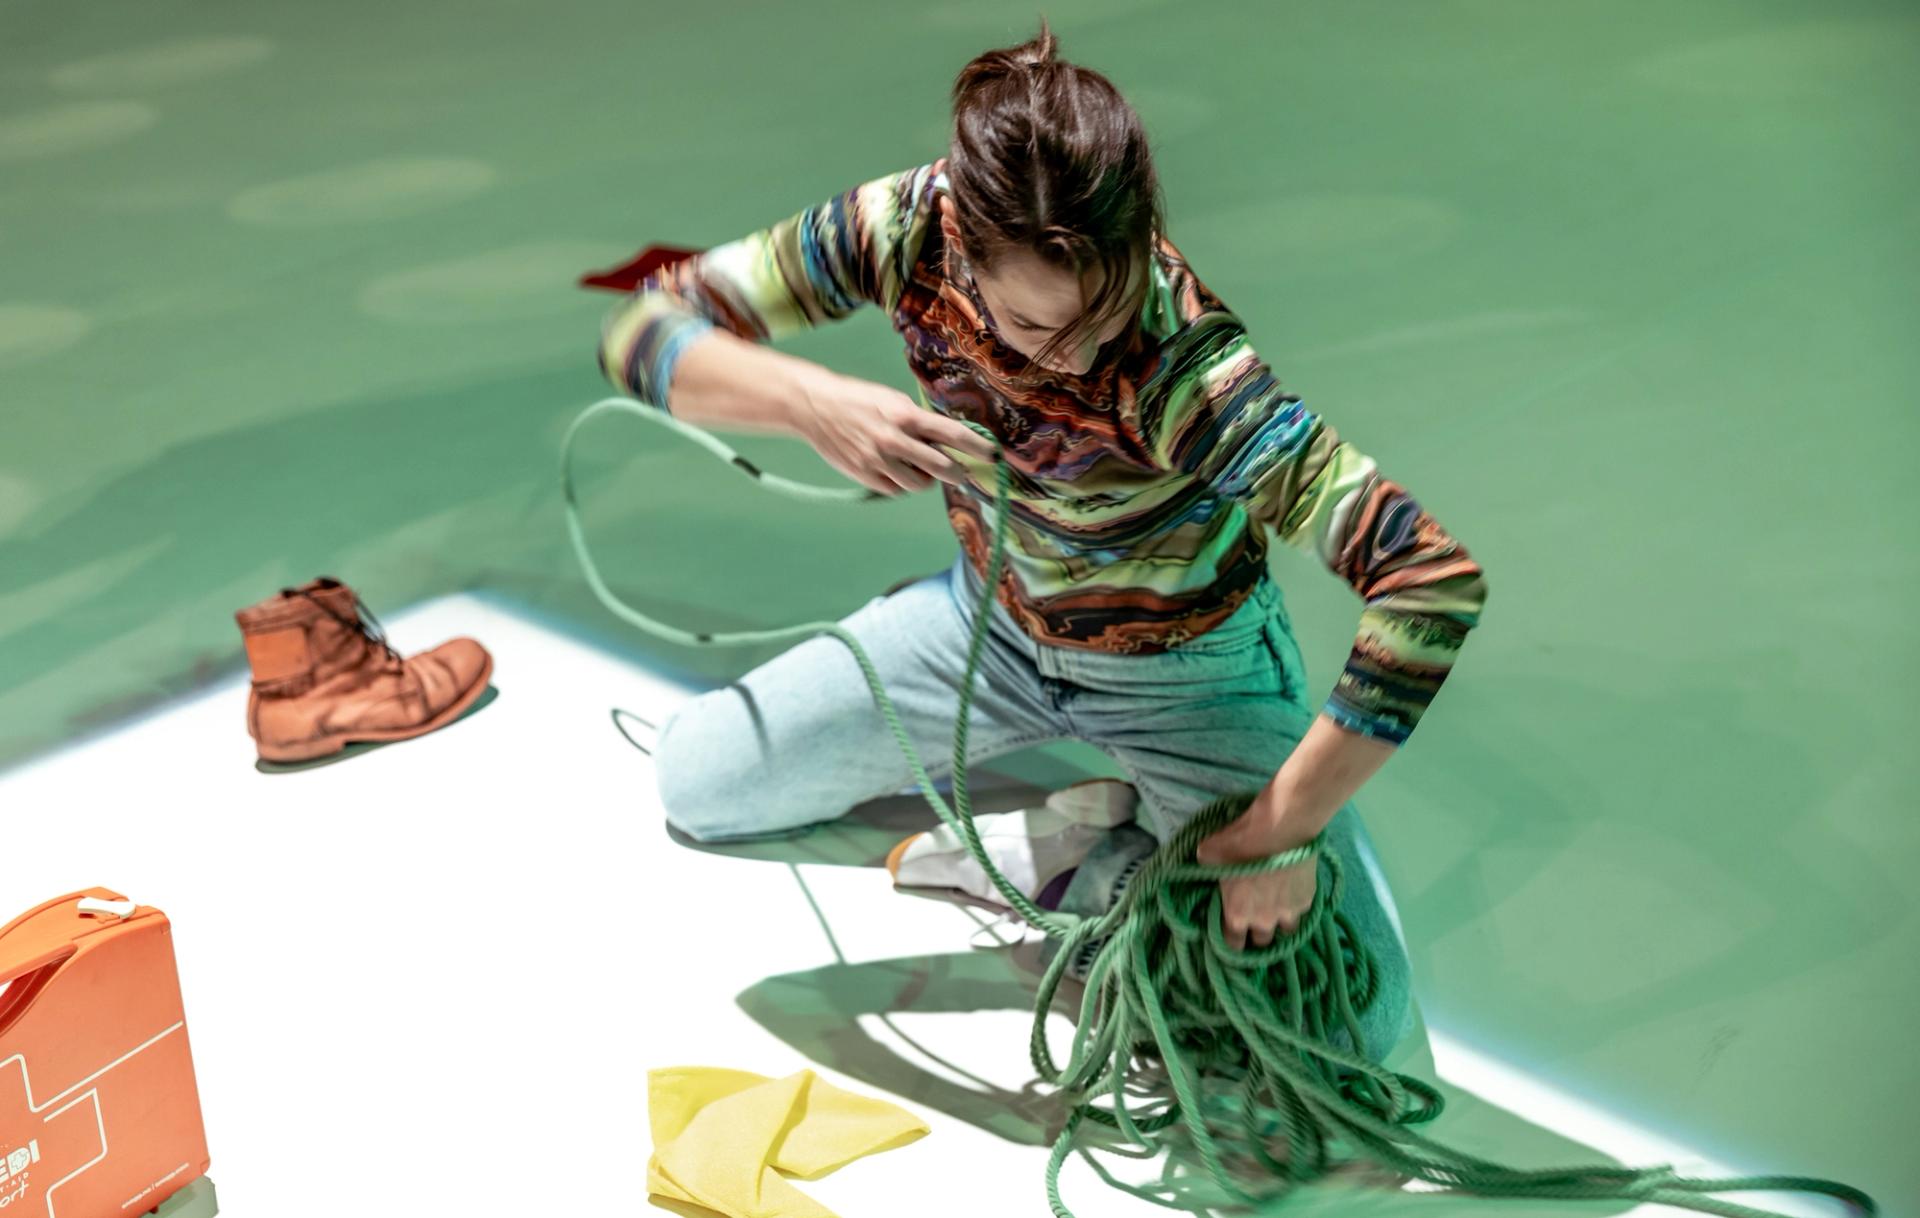 Ingrid is sitting on the floor in pale jeans and a colourful shirt. Around her are several mundane objects and she is managing a green rope. 